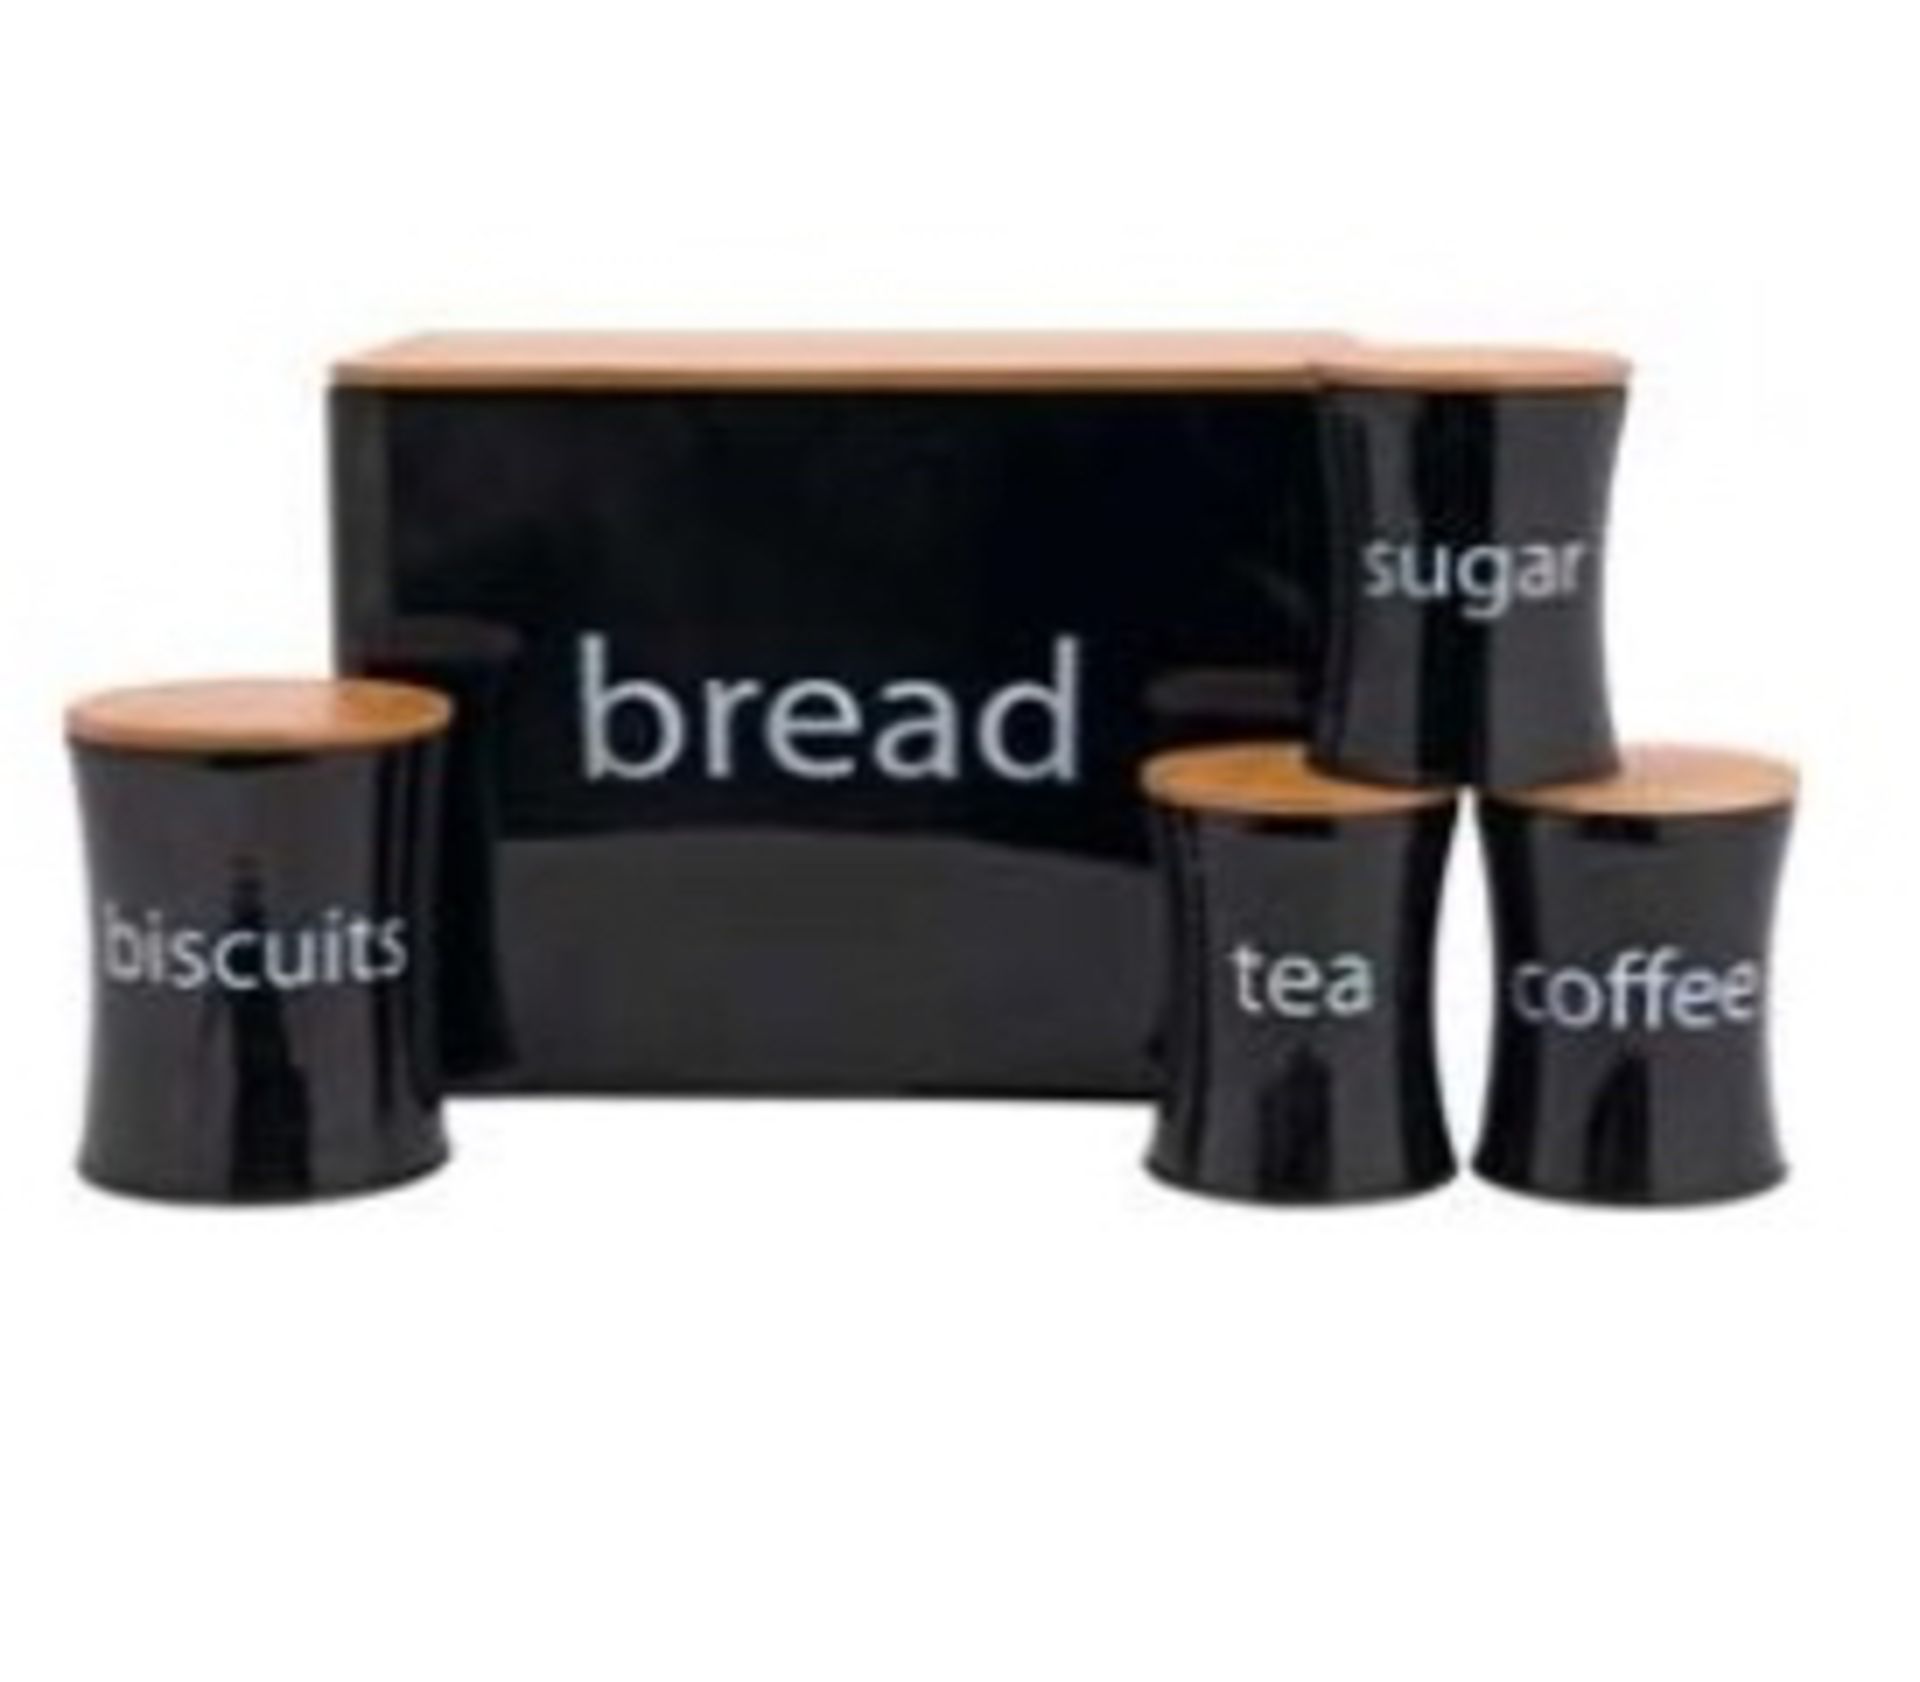 6 x 5 Piece Kitchen Storage Sets (BLACK) With bamboo lids. Very high retail value. Each set